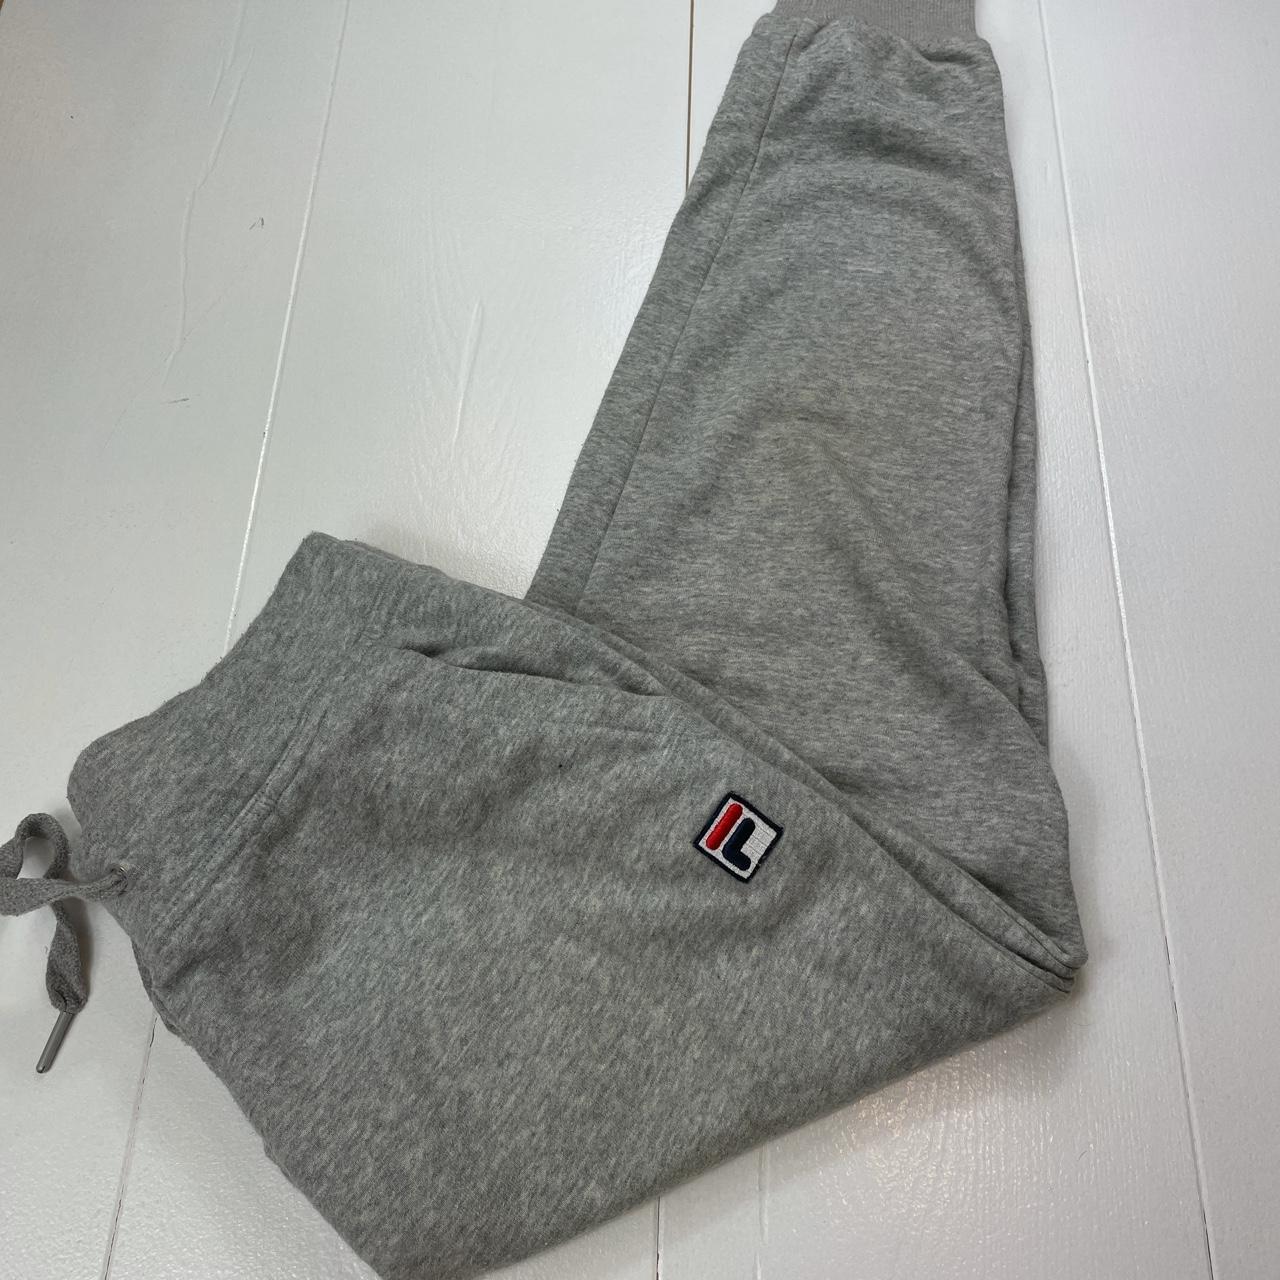 FILA grey joggers/tracksuit bottoms with embroidered... - Depop